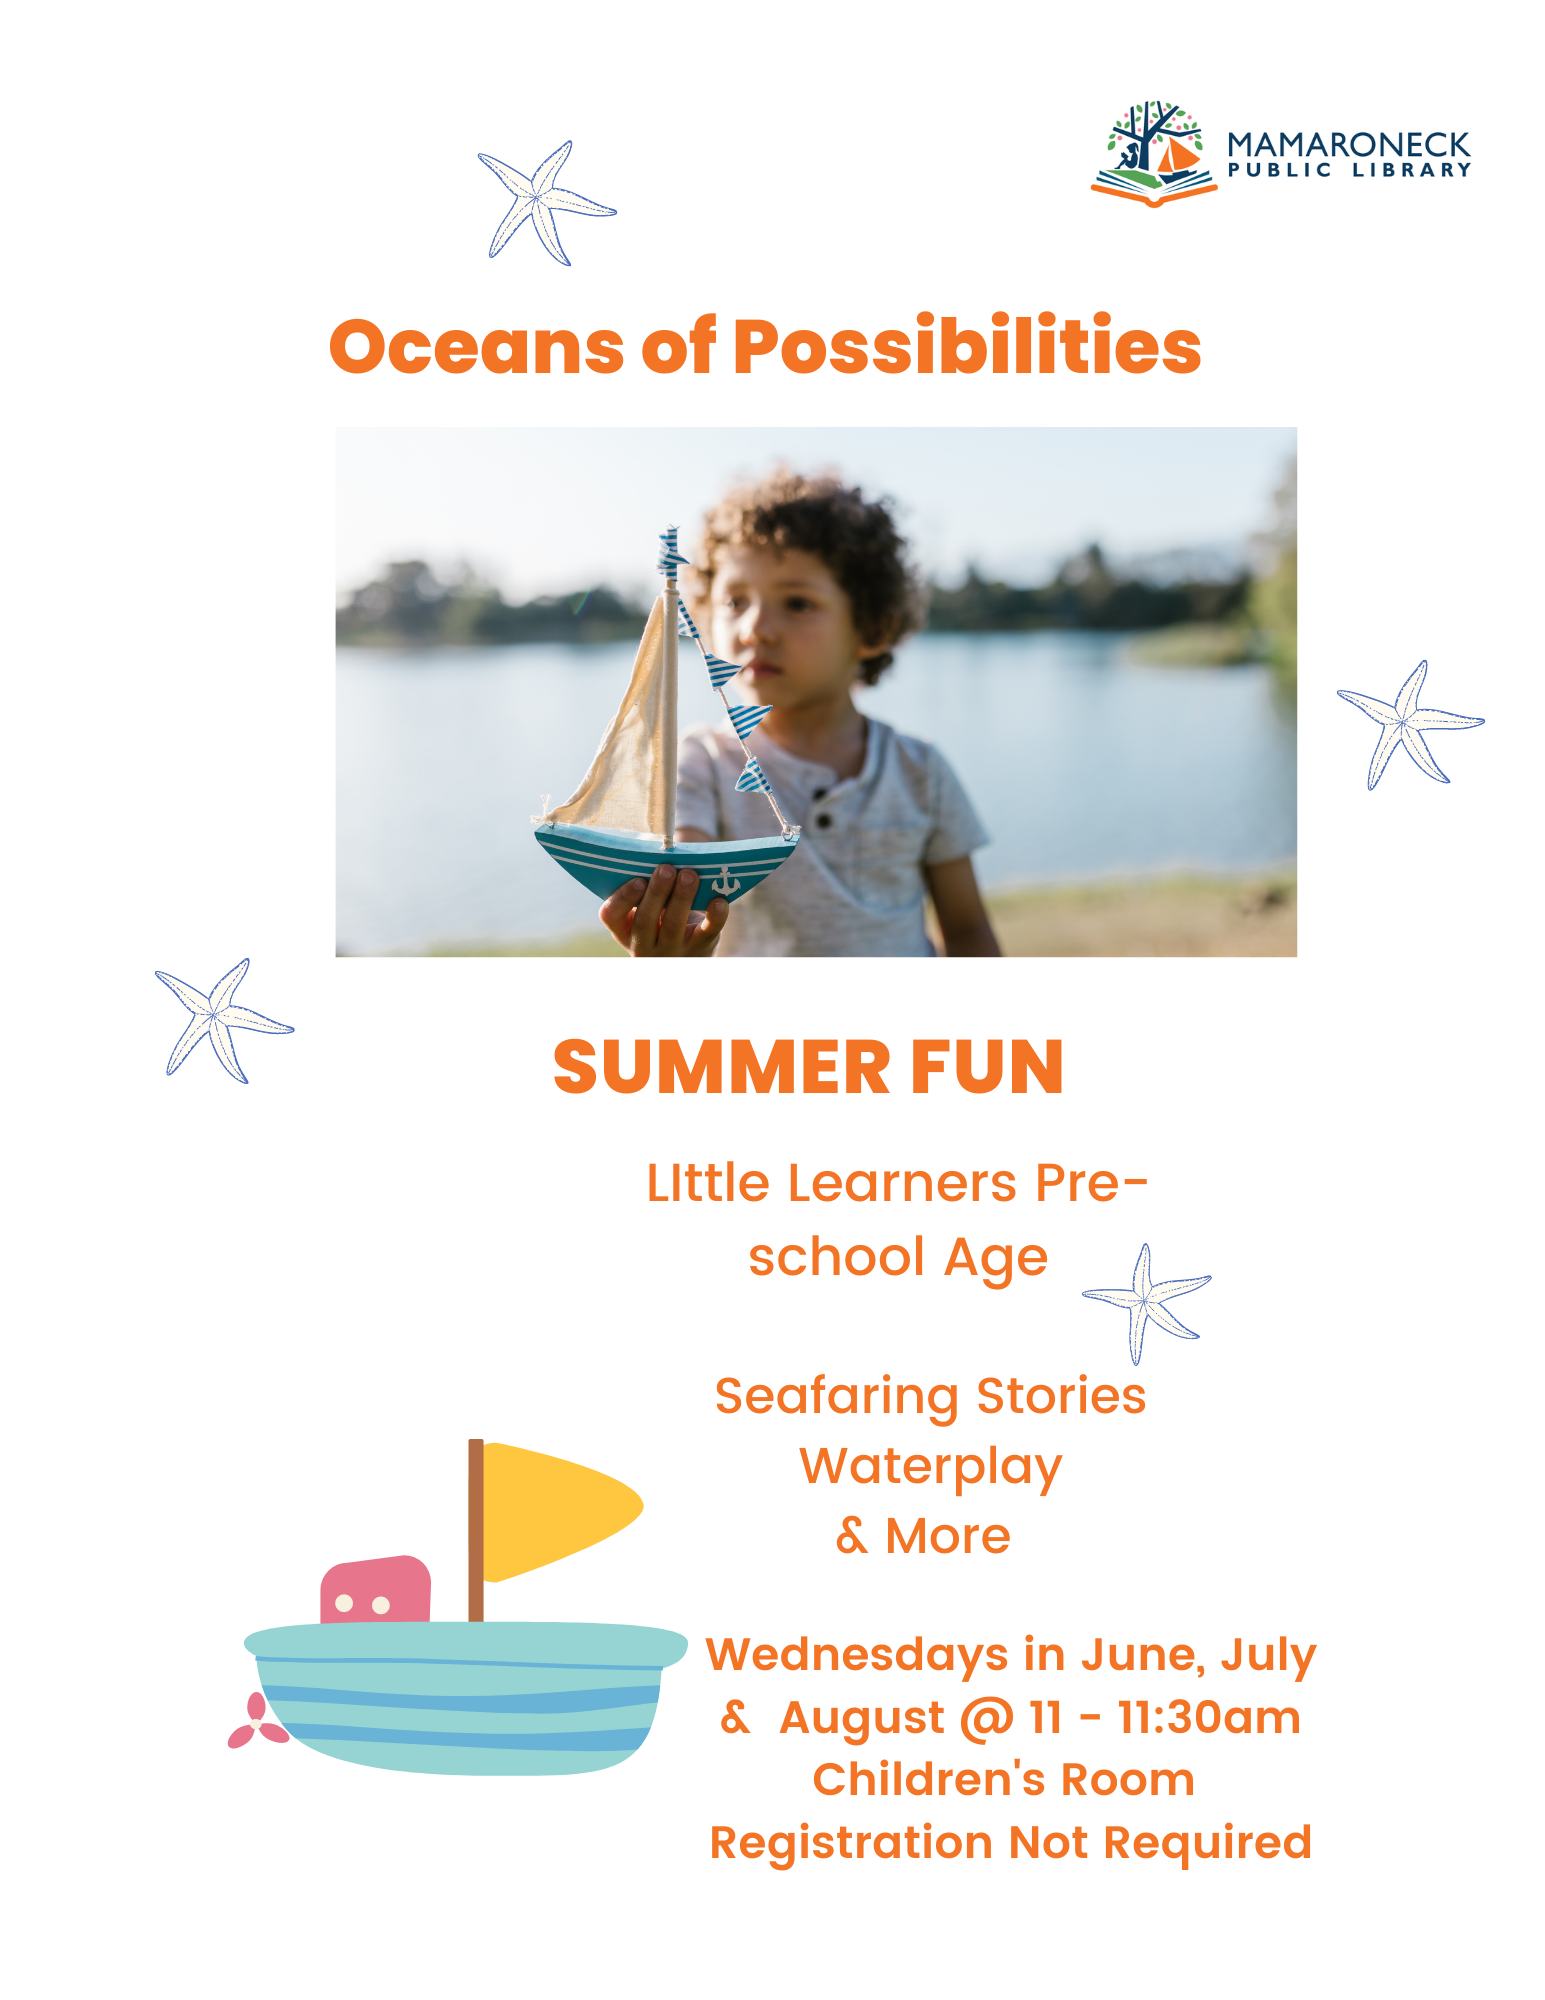 Seafaring stories and waterplay for children